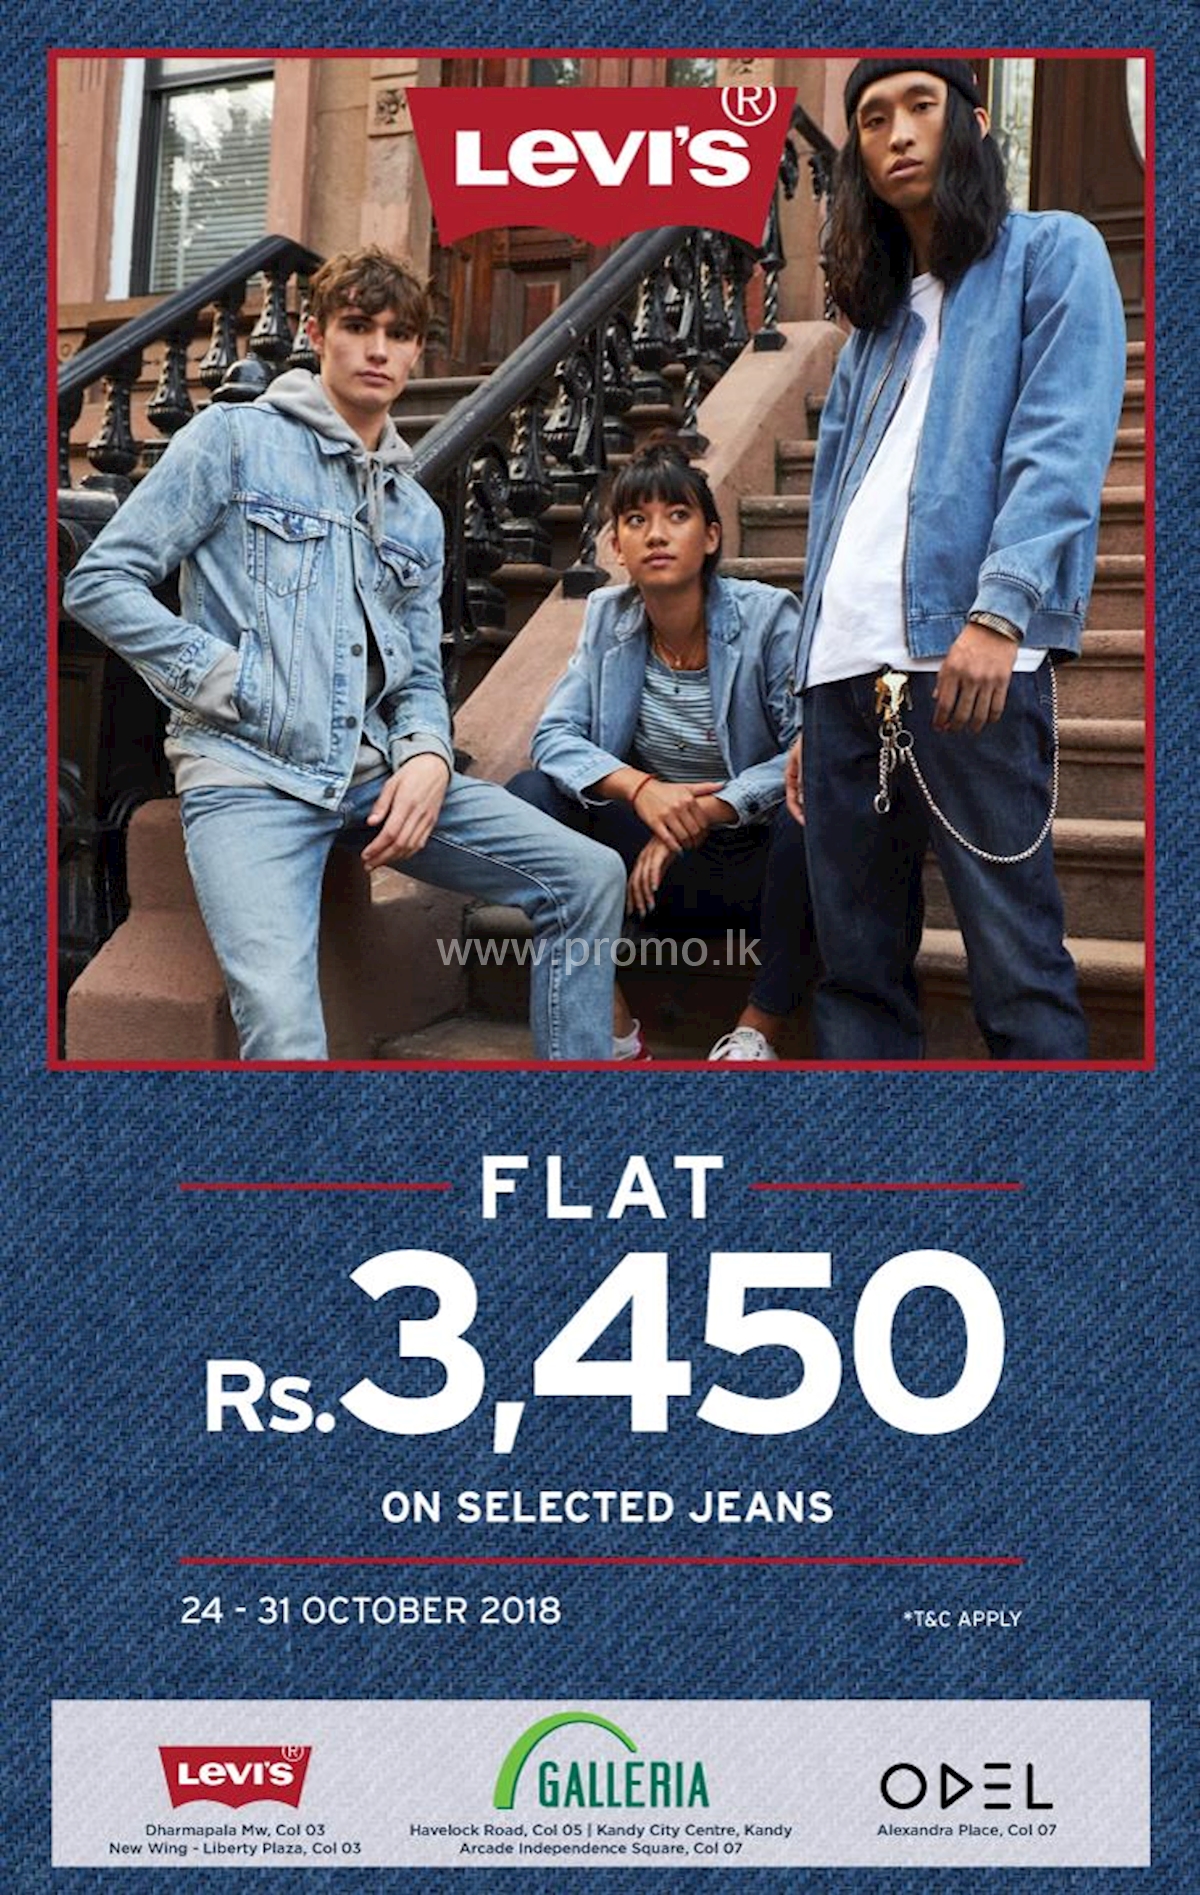 Levis Jeans at a Flat rate of Rs 